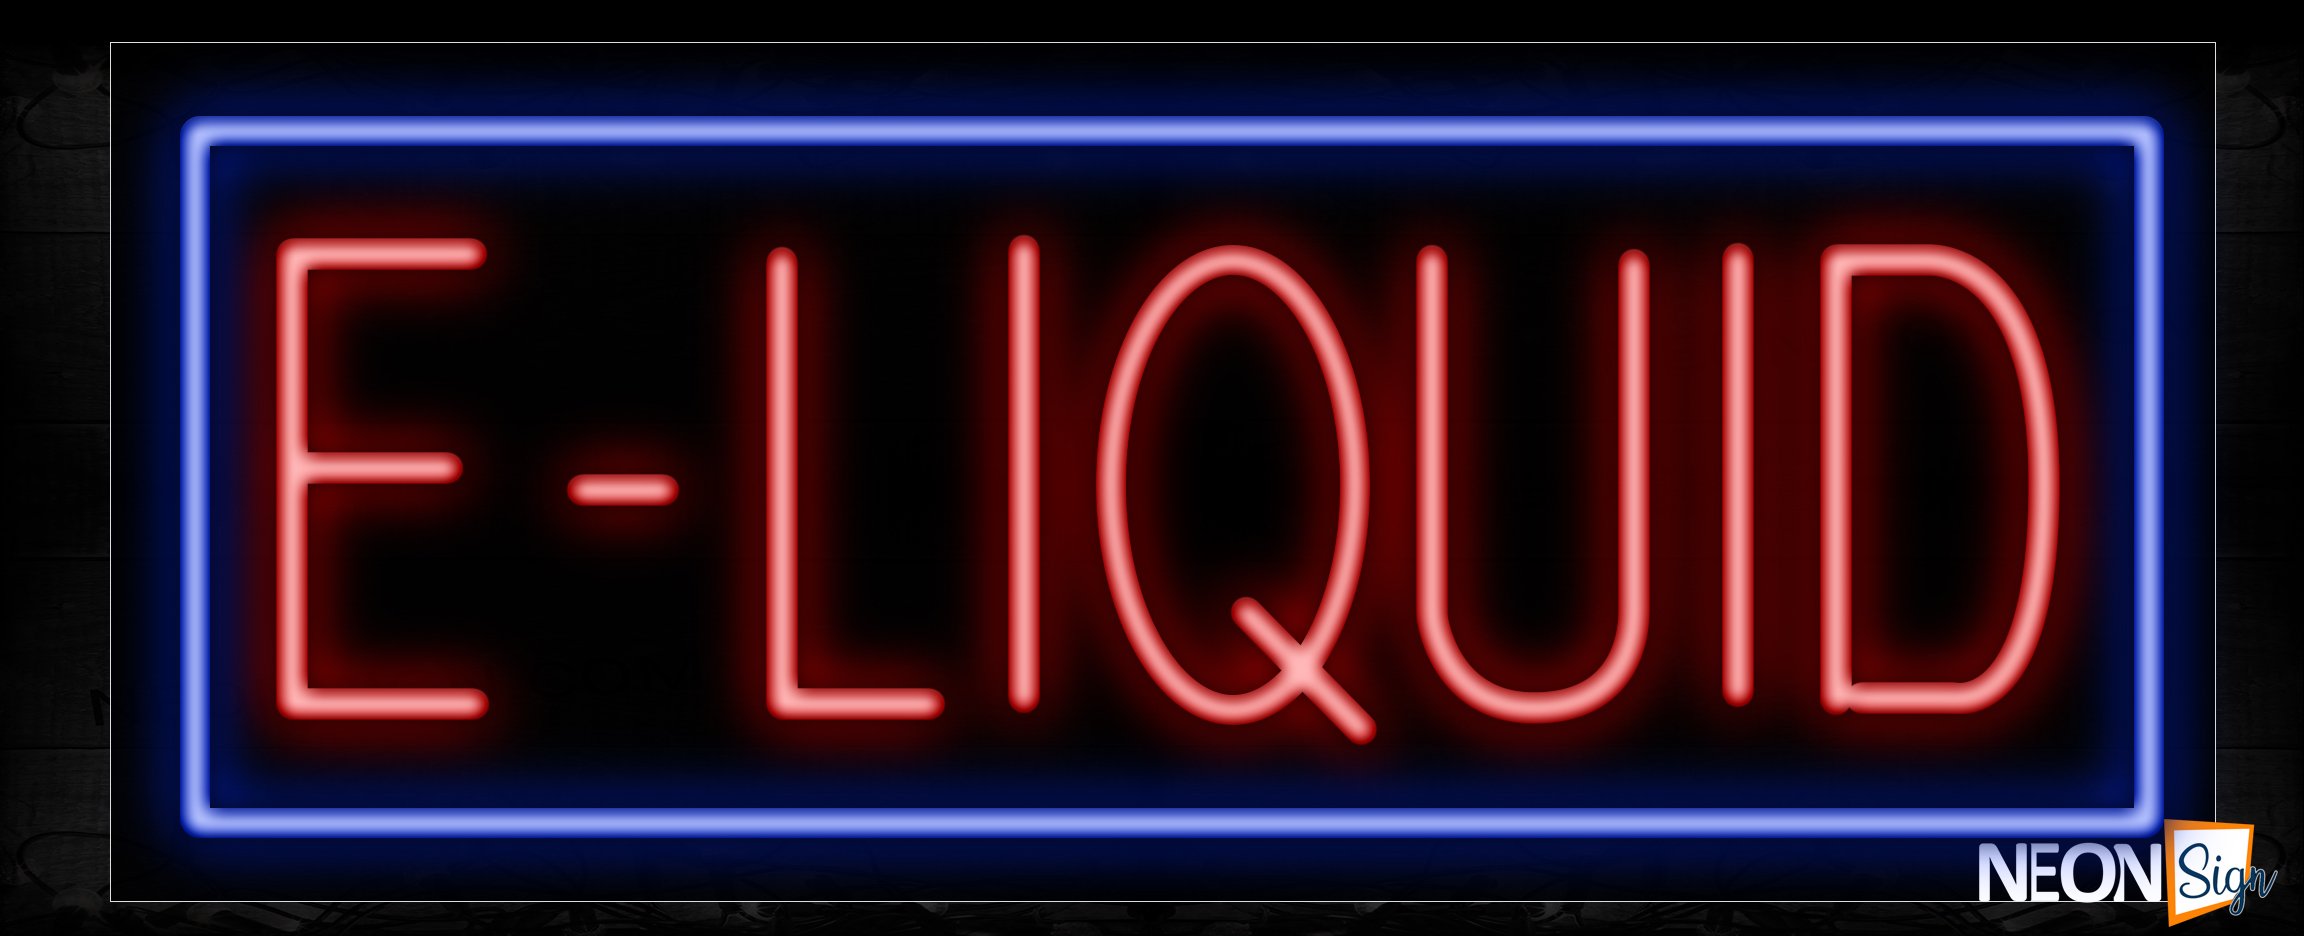 Image of 11394 E-liquid With Blue Rectangle Traditional Neon_13x32 Black Backing